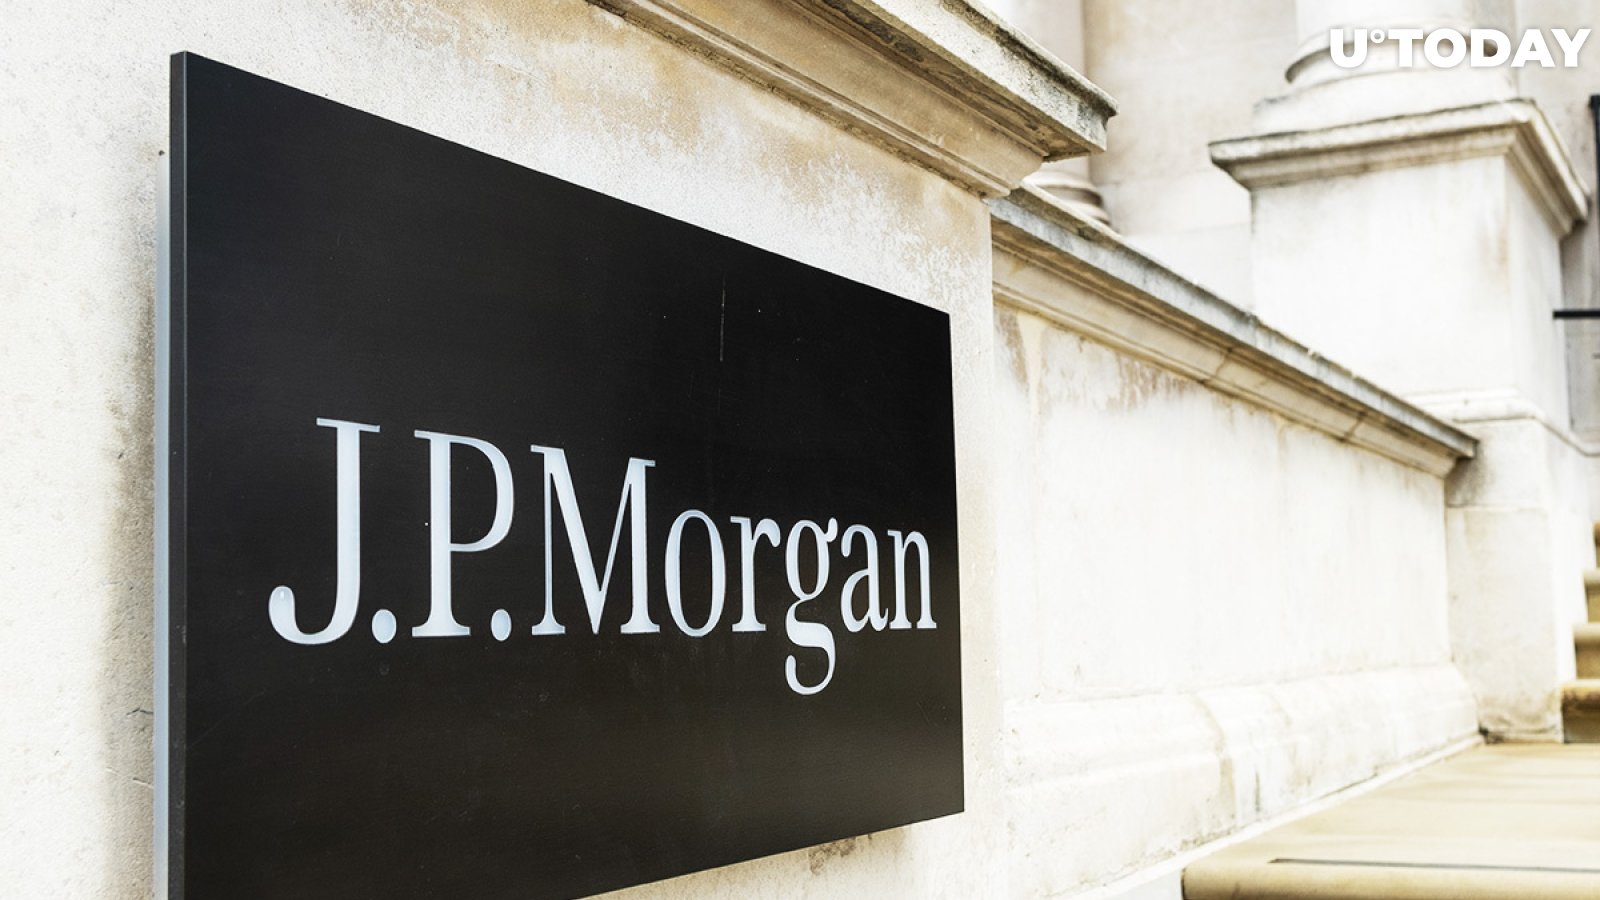 JPMorgan Opens Access to Bitcoin, Bitcoin Cash and Ethereum Funds for Retail Wealth Clients